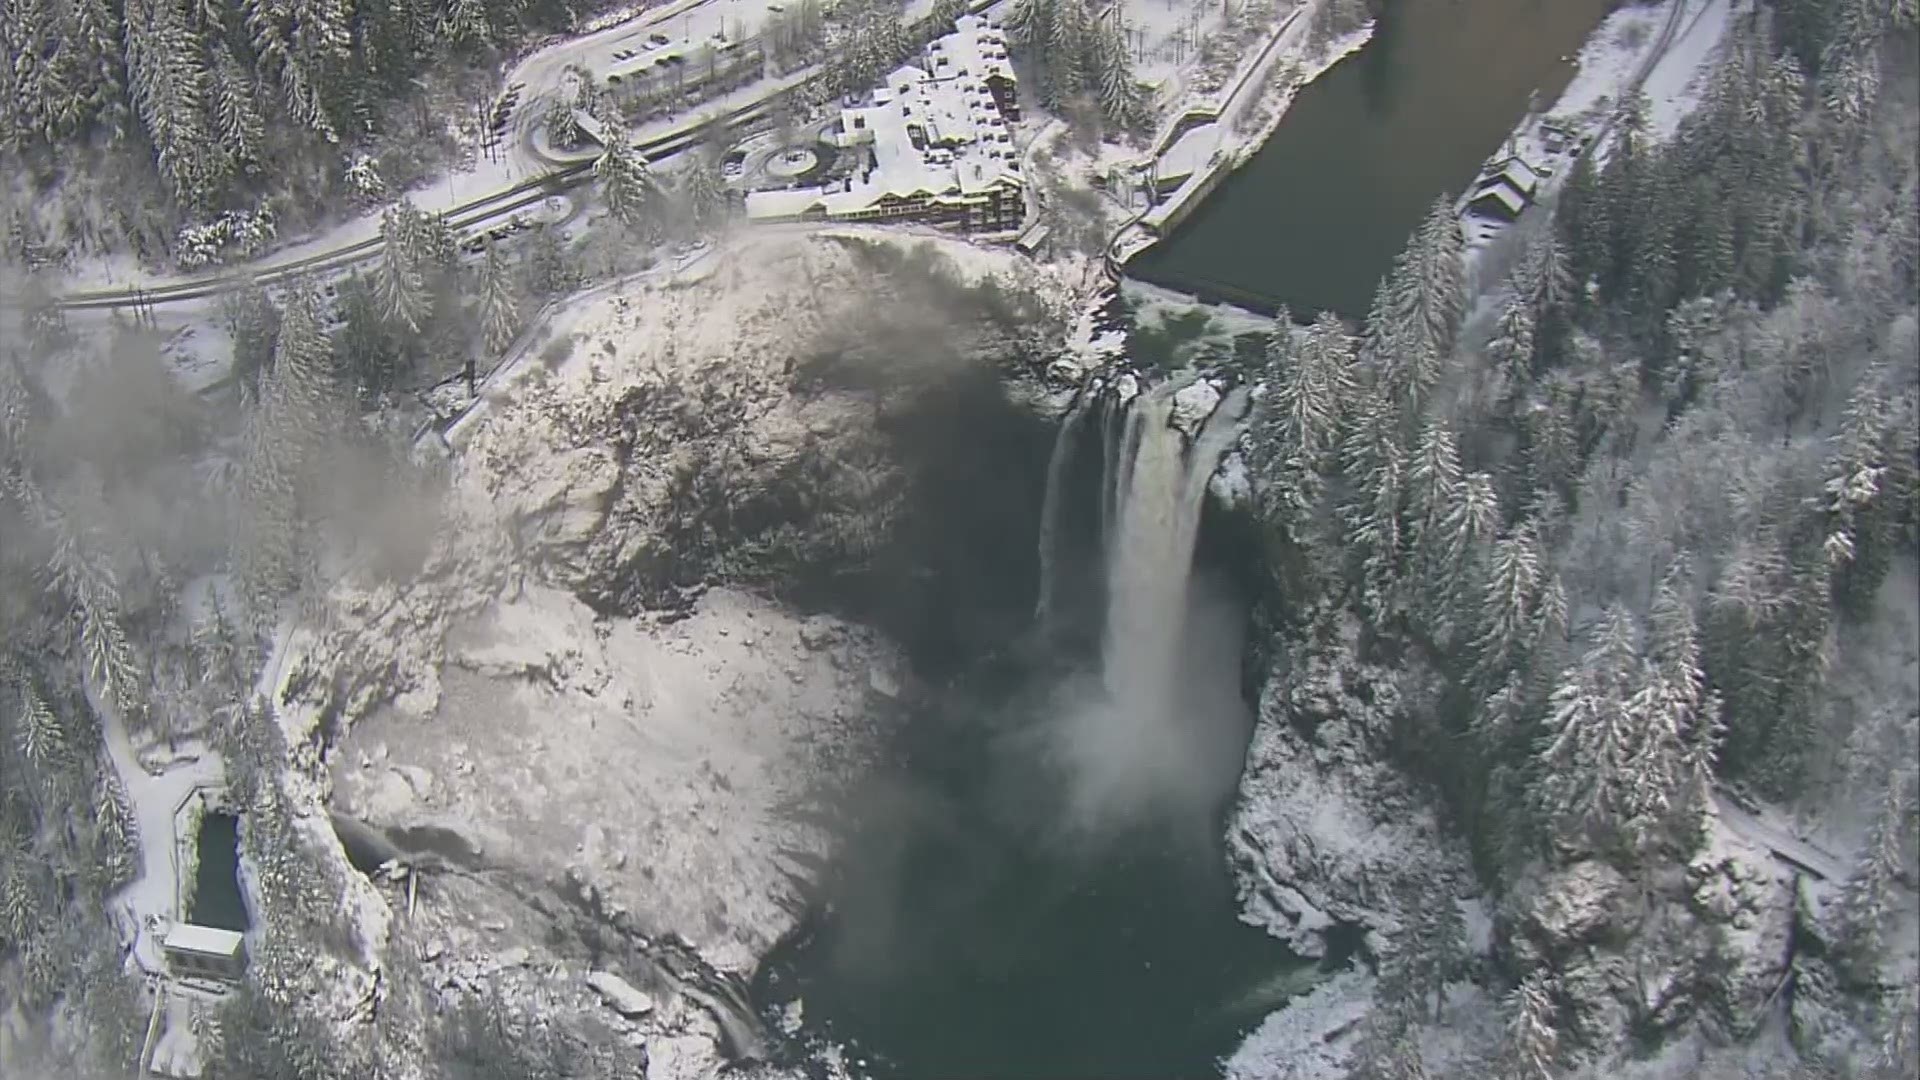 KING 5 helicopter SkyKING flew over a snow-covered Snoqualmie Falls on Tuesday, Jan. 14, 2020 - https://www.king5.com/article/weather/weather-blog/timeline-cold-temp